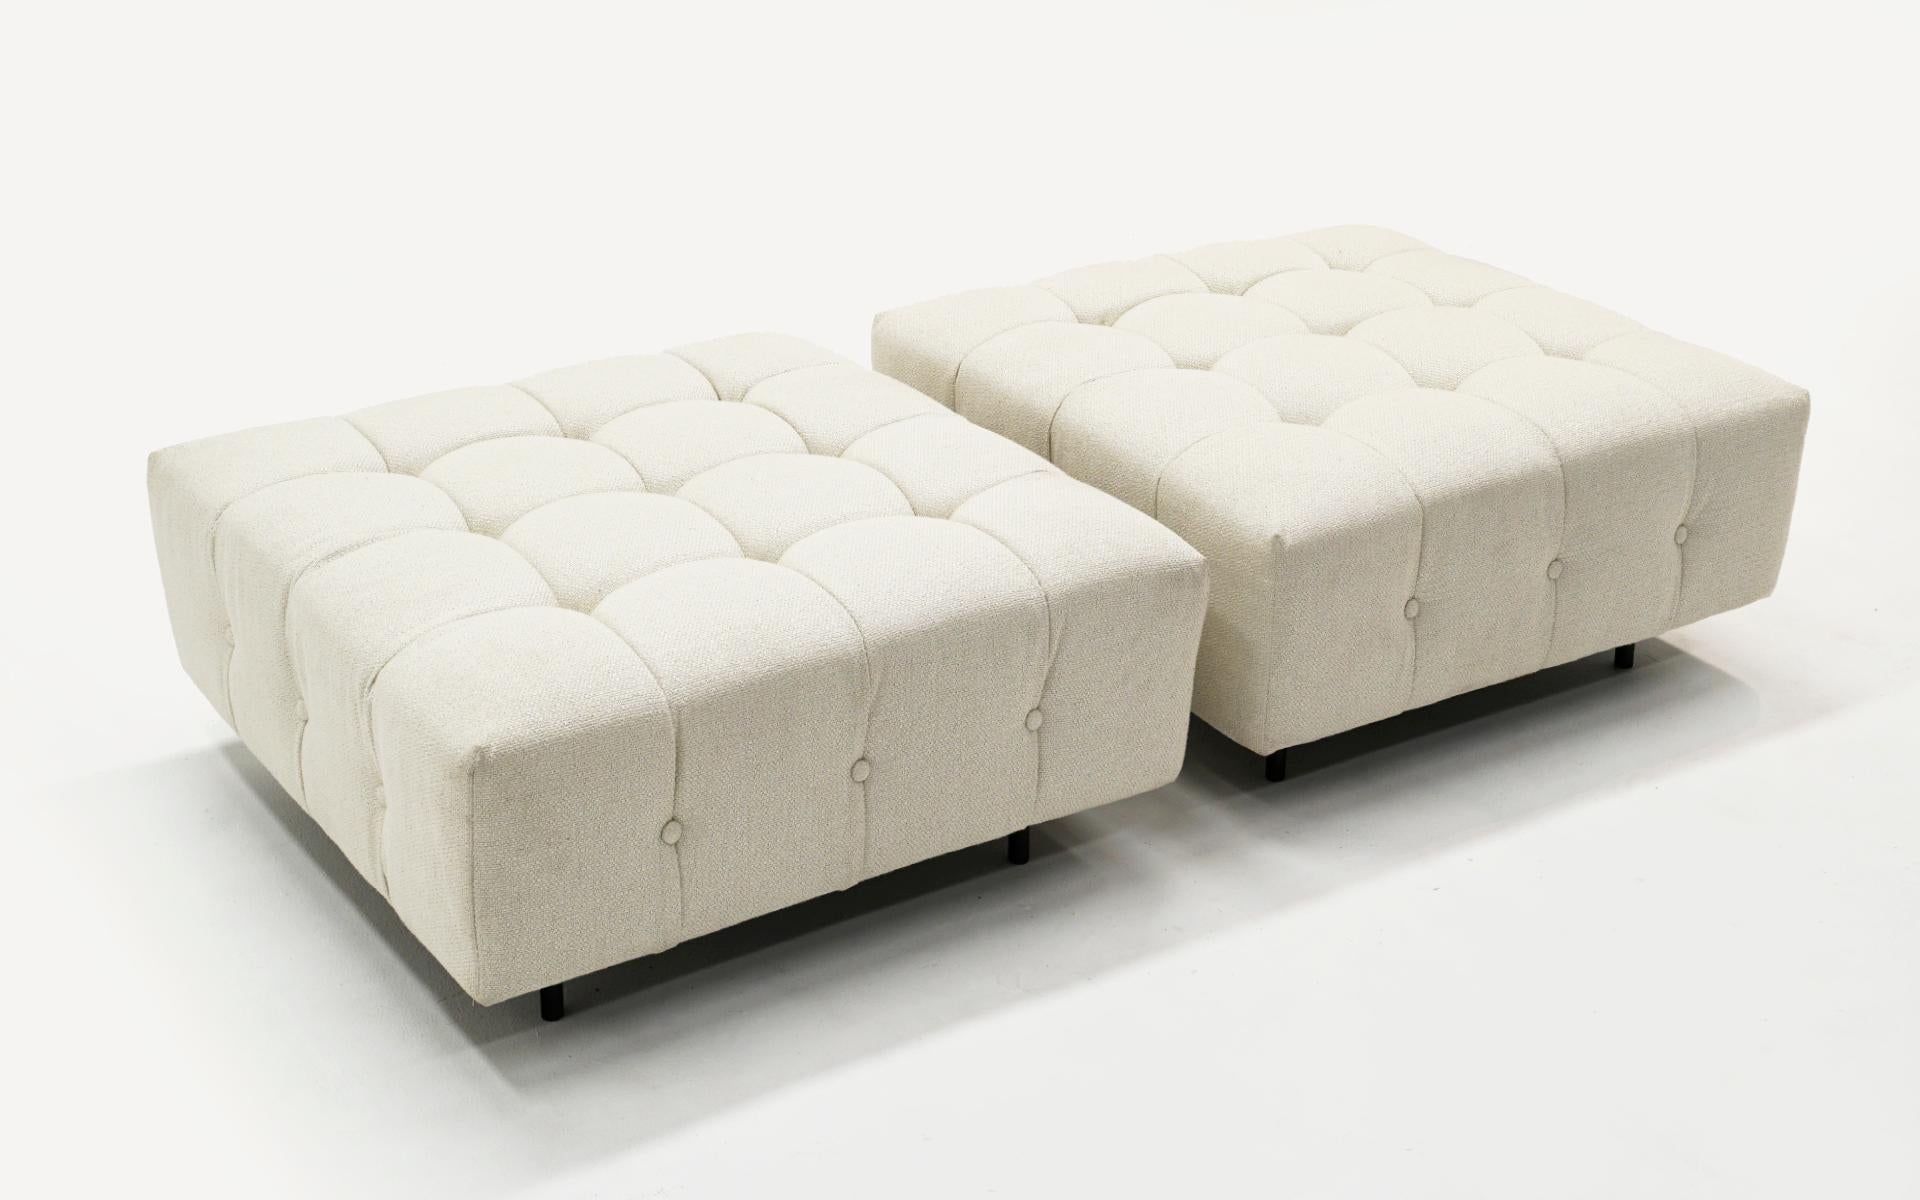 Mid-20th Century Pair of Ottomans by Harvey Probber, New White Upholstery, Signed, Ready to Use For Sale